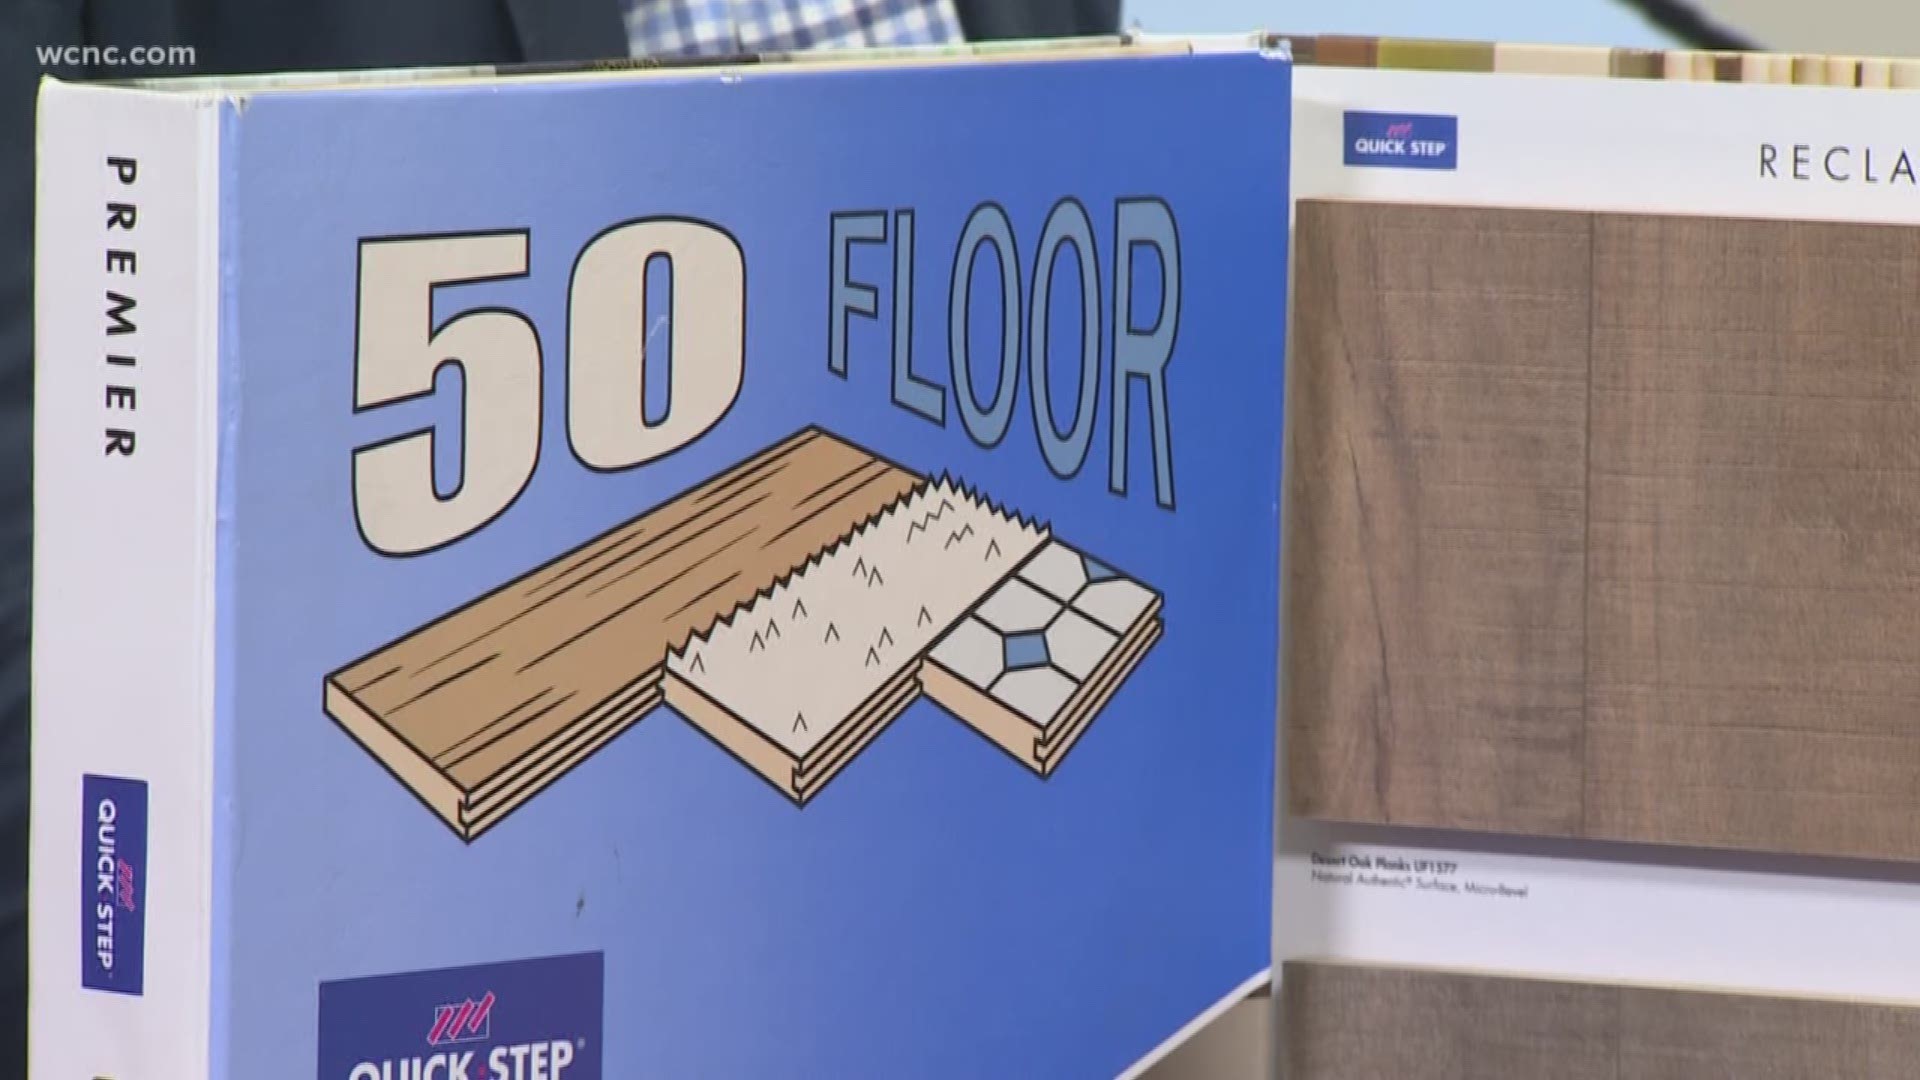 50 Floors comes to your home, shows you flooring samples and moves all of your furniture for flooring installation in one day!
877-50-floor